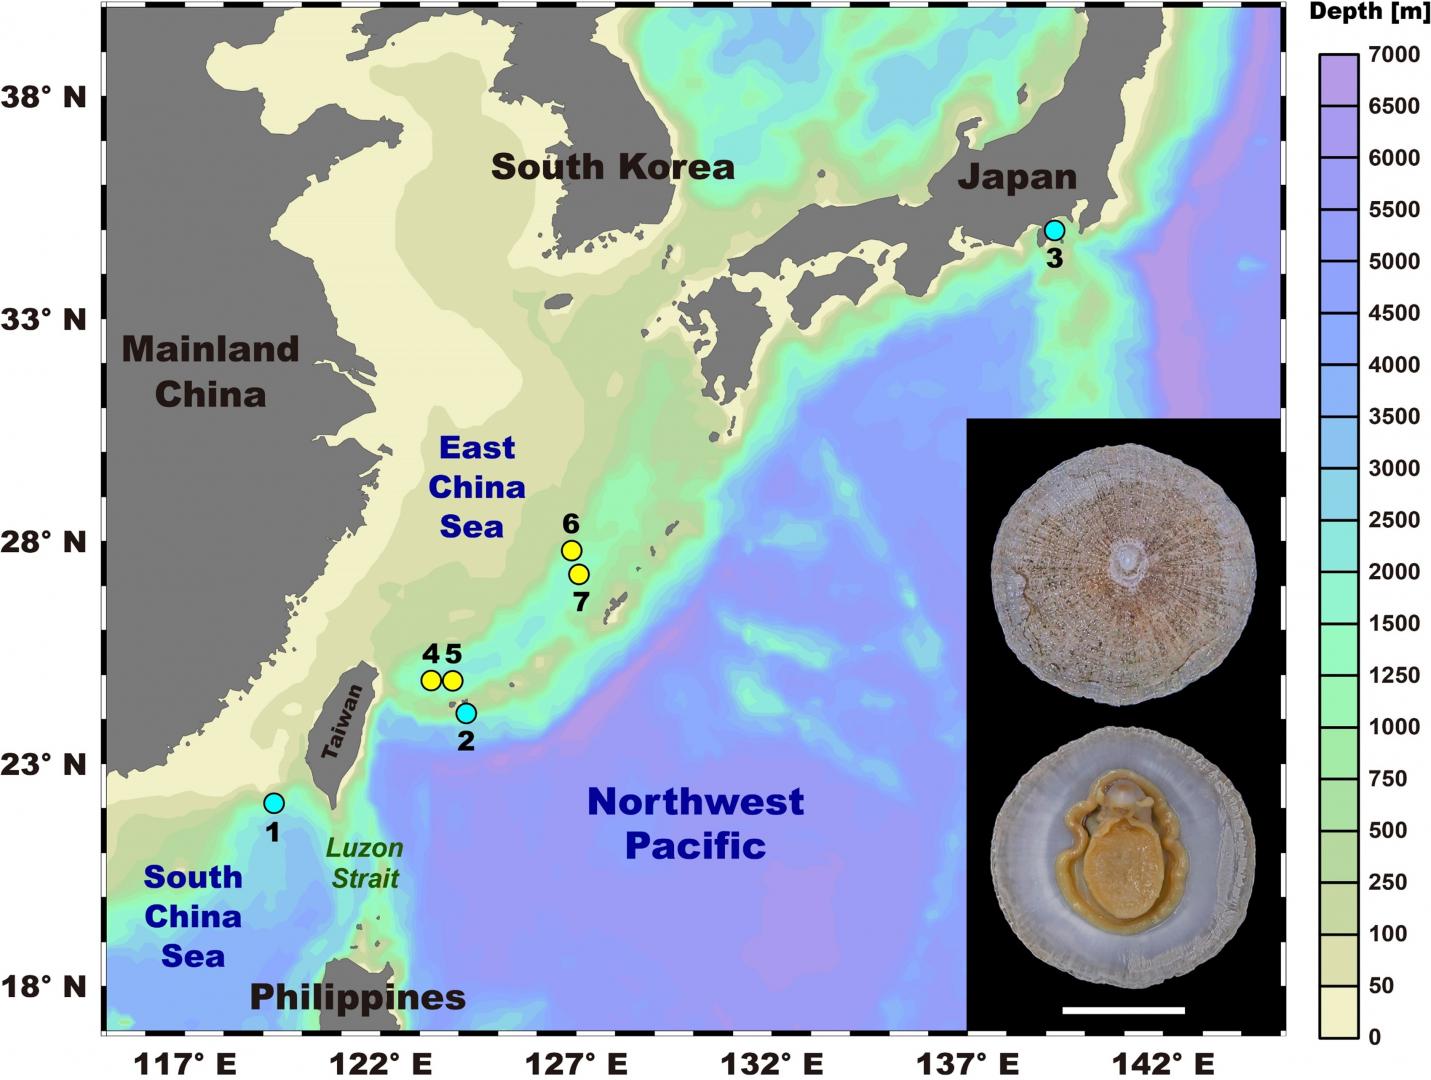 Sampling hydrocarbon seeps (blue dots) and hydrothermal vents (yellow dots) of deep-sea limpets in the Northwest Pacific. 1-3: three seep areas in the Jiaolong Ridge of the South China Sea, the Kuroshima Knoll, and the Sagami Bay, respectively; 4-7: four vent fields in the Okinawa Trough. Inset: a representative photograph showing the morphology of the studied deep-sea limpet (scale bar = 1 cm).